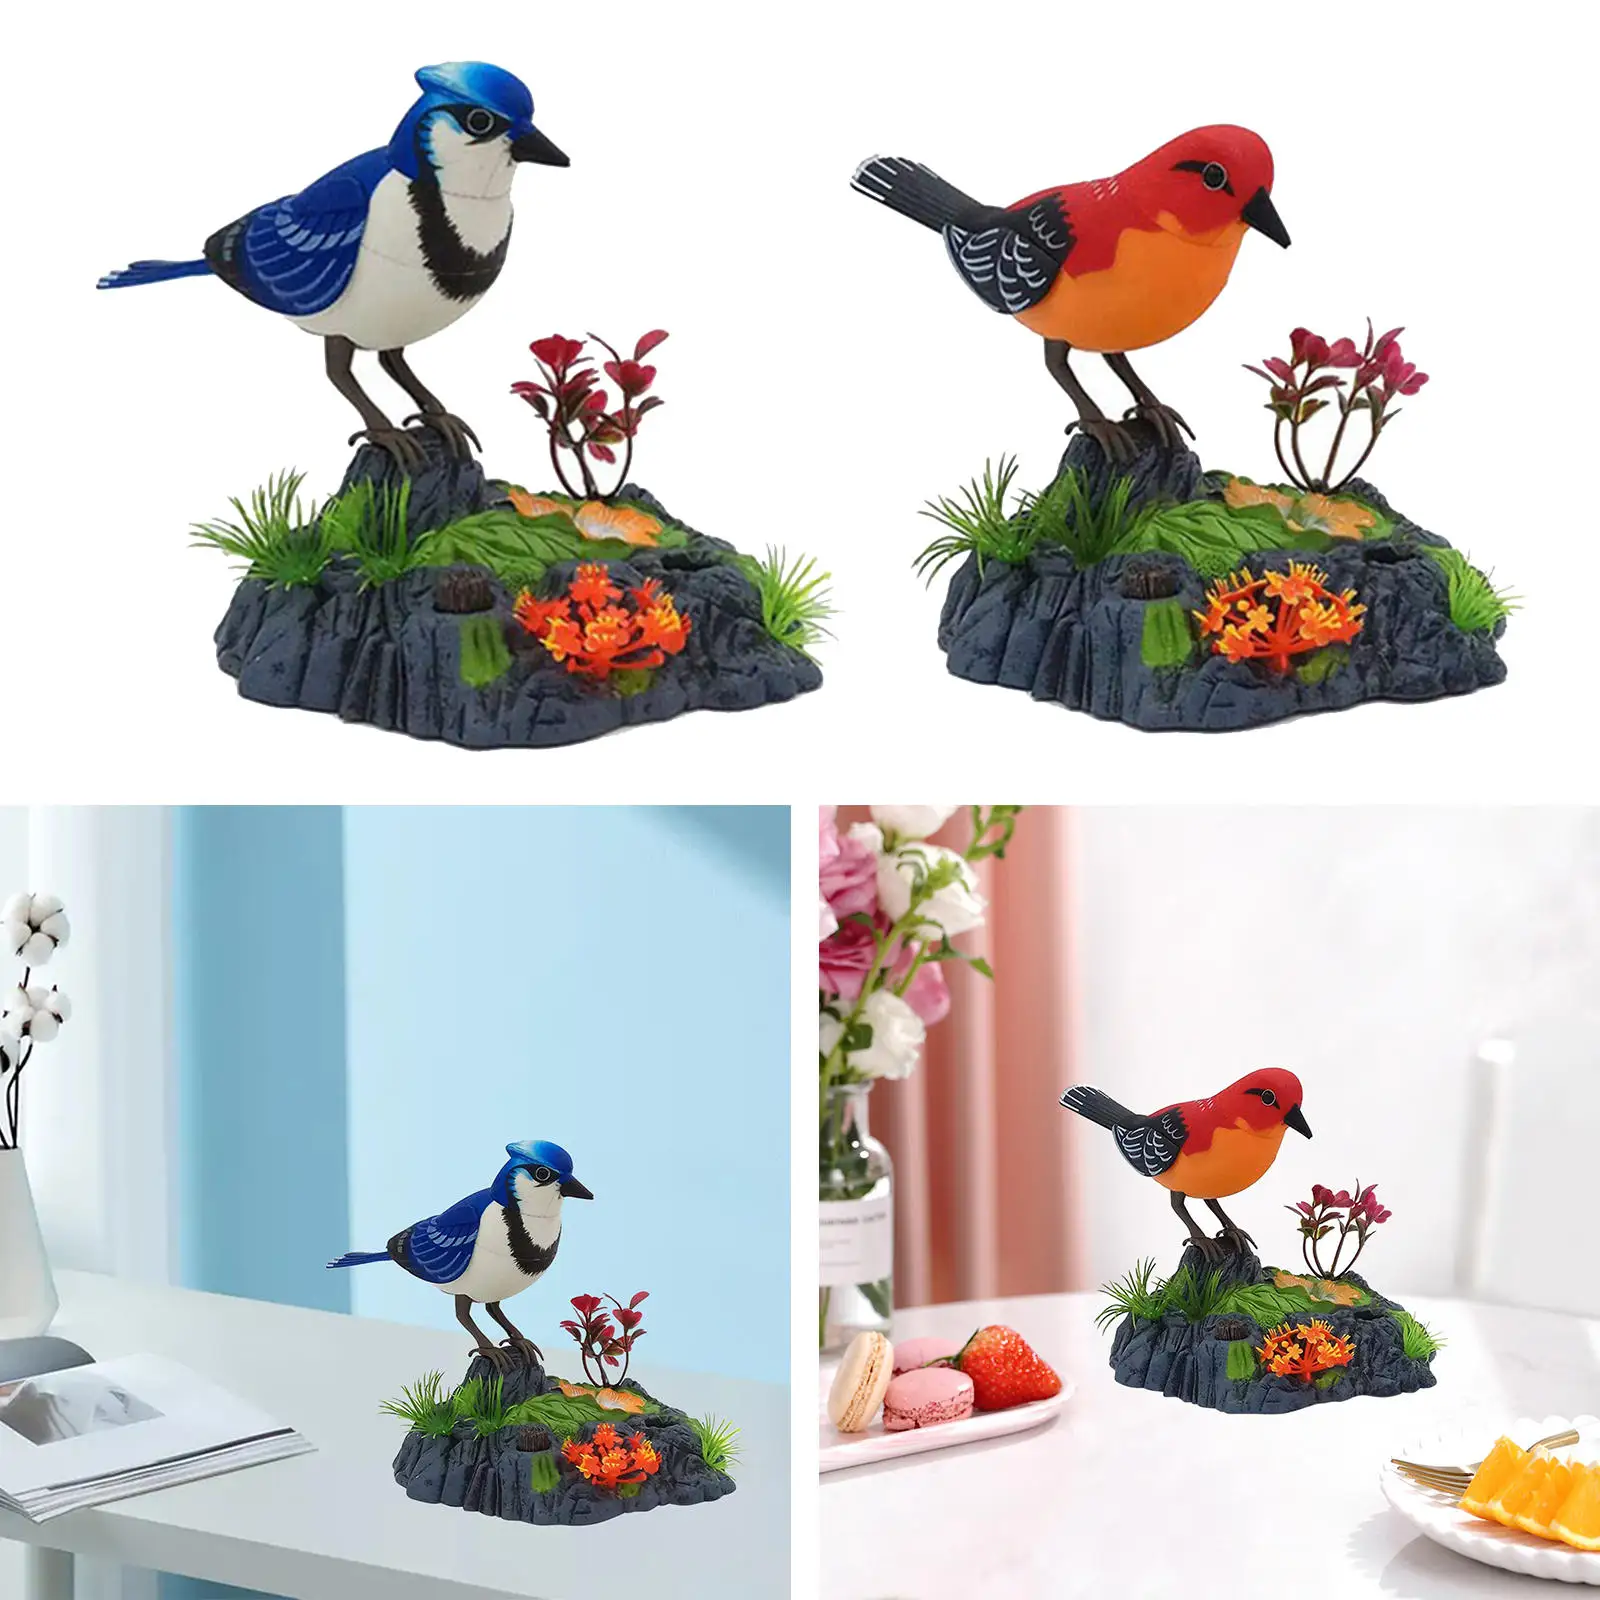 Plastic Bird Toys with Voice Control Moving, Chirping, Bird Festival, Perfect for Home, Bedroom, Decoration, Education,